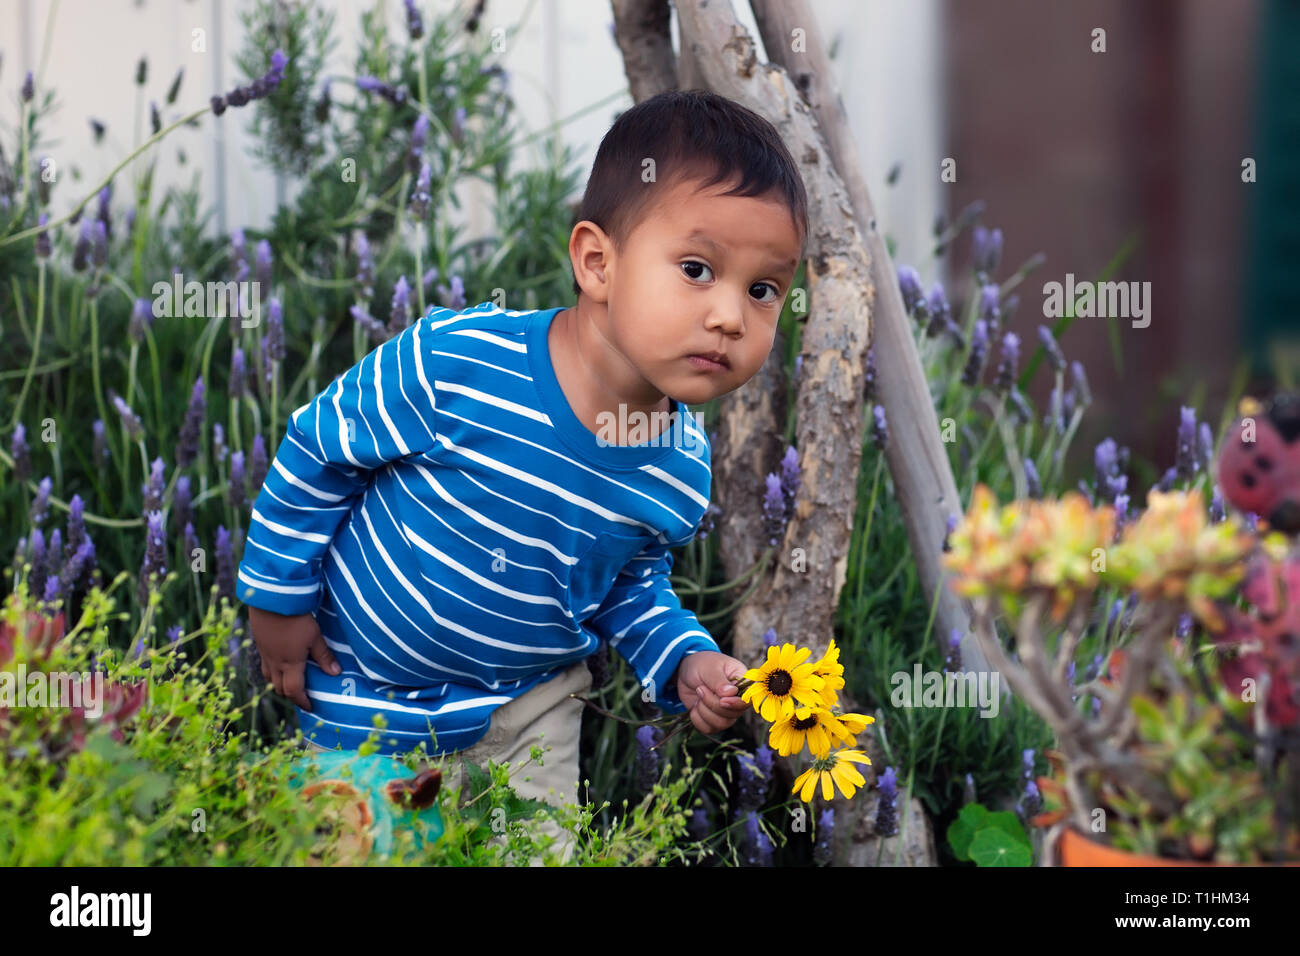 A toddler with a suspicious expression trying to hide,  while holding picked flowers from a lush california native garden. Stock Photo